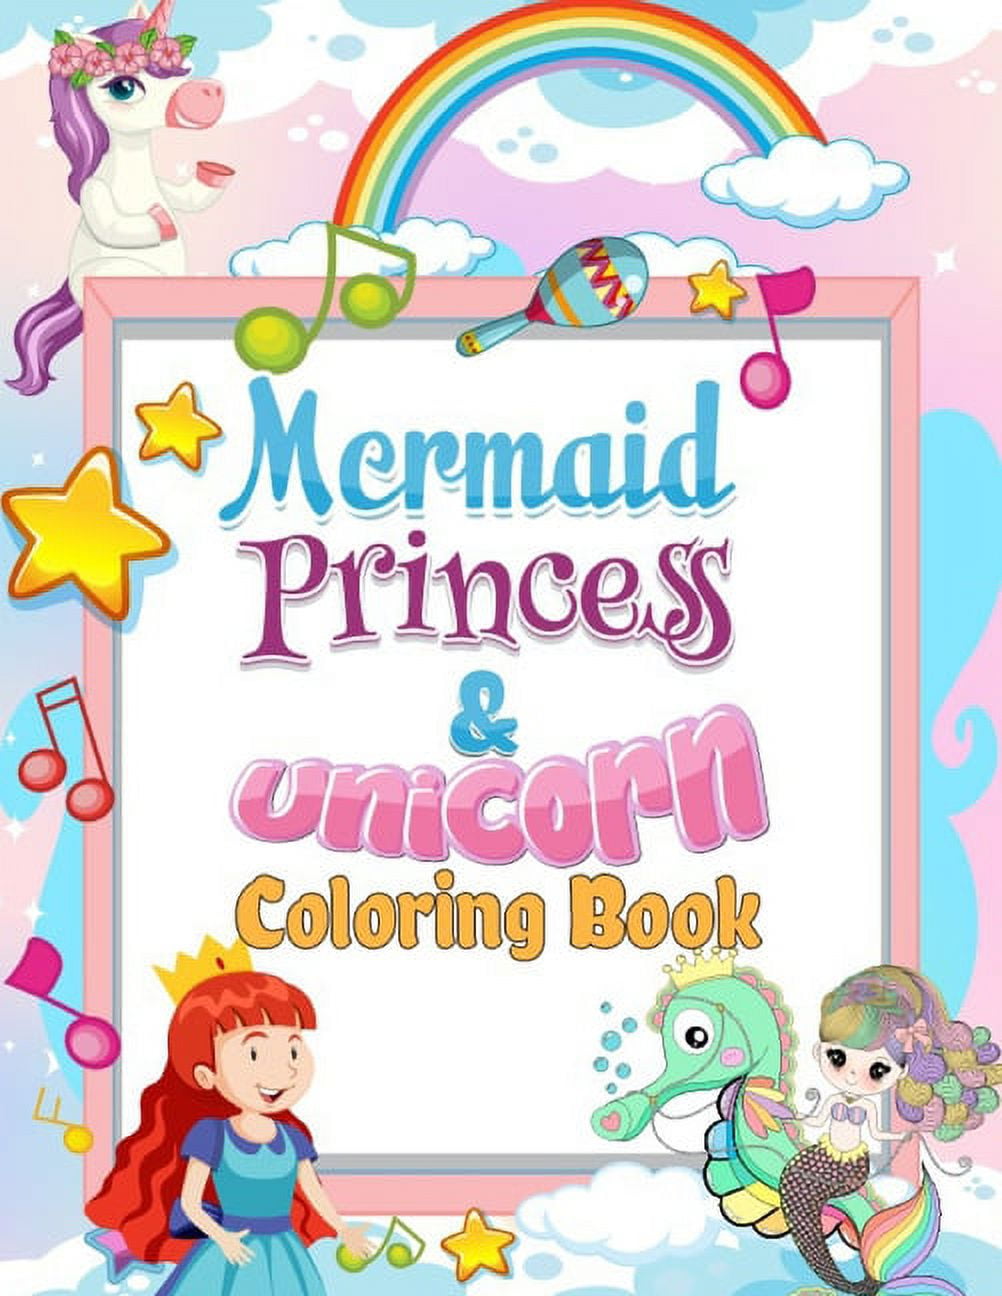 GirlZone Arts and Crafts Relaxation Coloring Book for Girls, 114 Magical  Designs to Color in, Fun Unicorn Gift Ideas for Girls and Mermaid Coloring